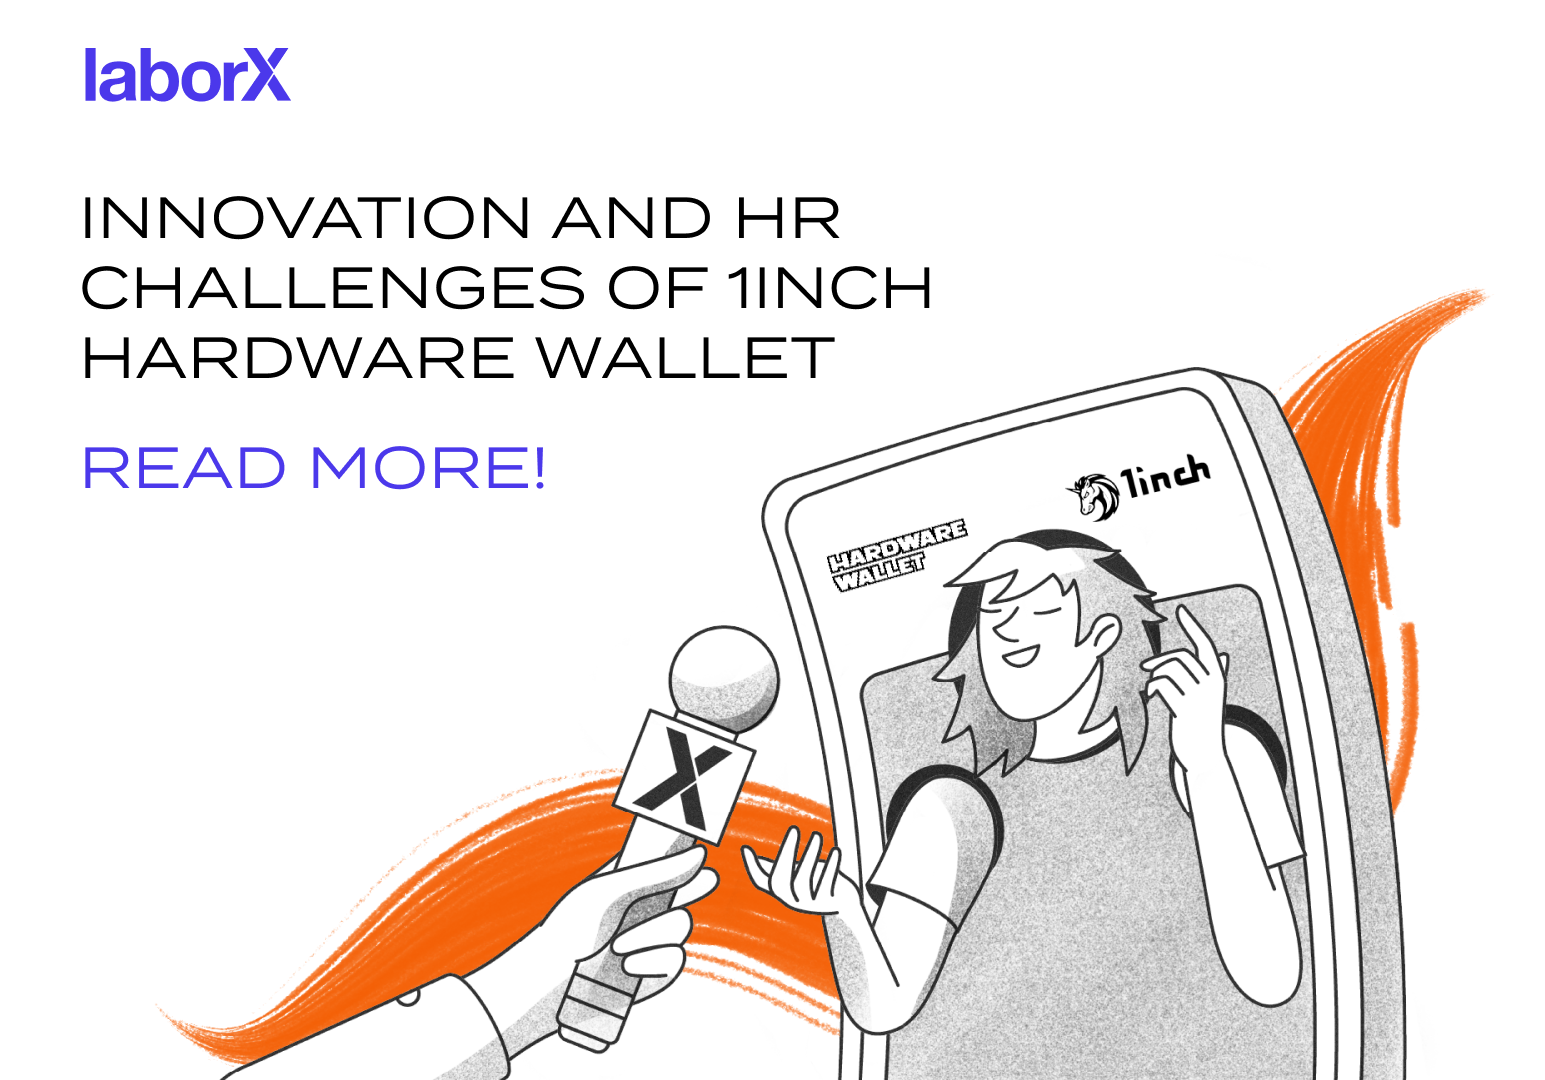 A wallet like no other: 1inch Hardware Wallet and its Web3 Hiring Challenge